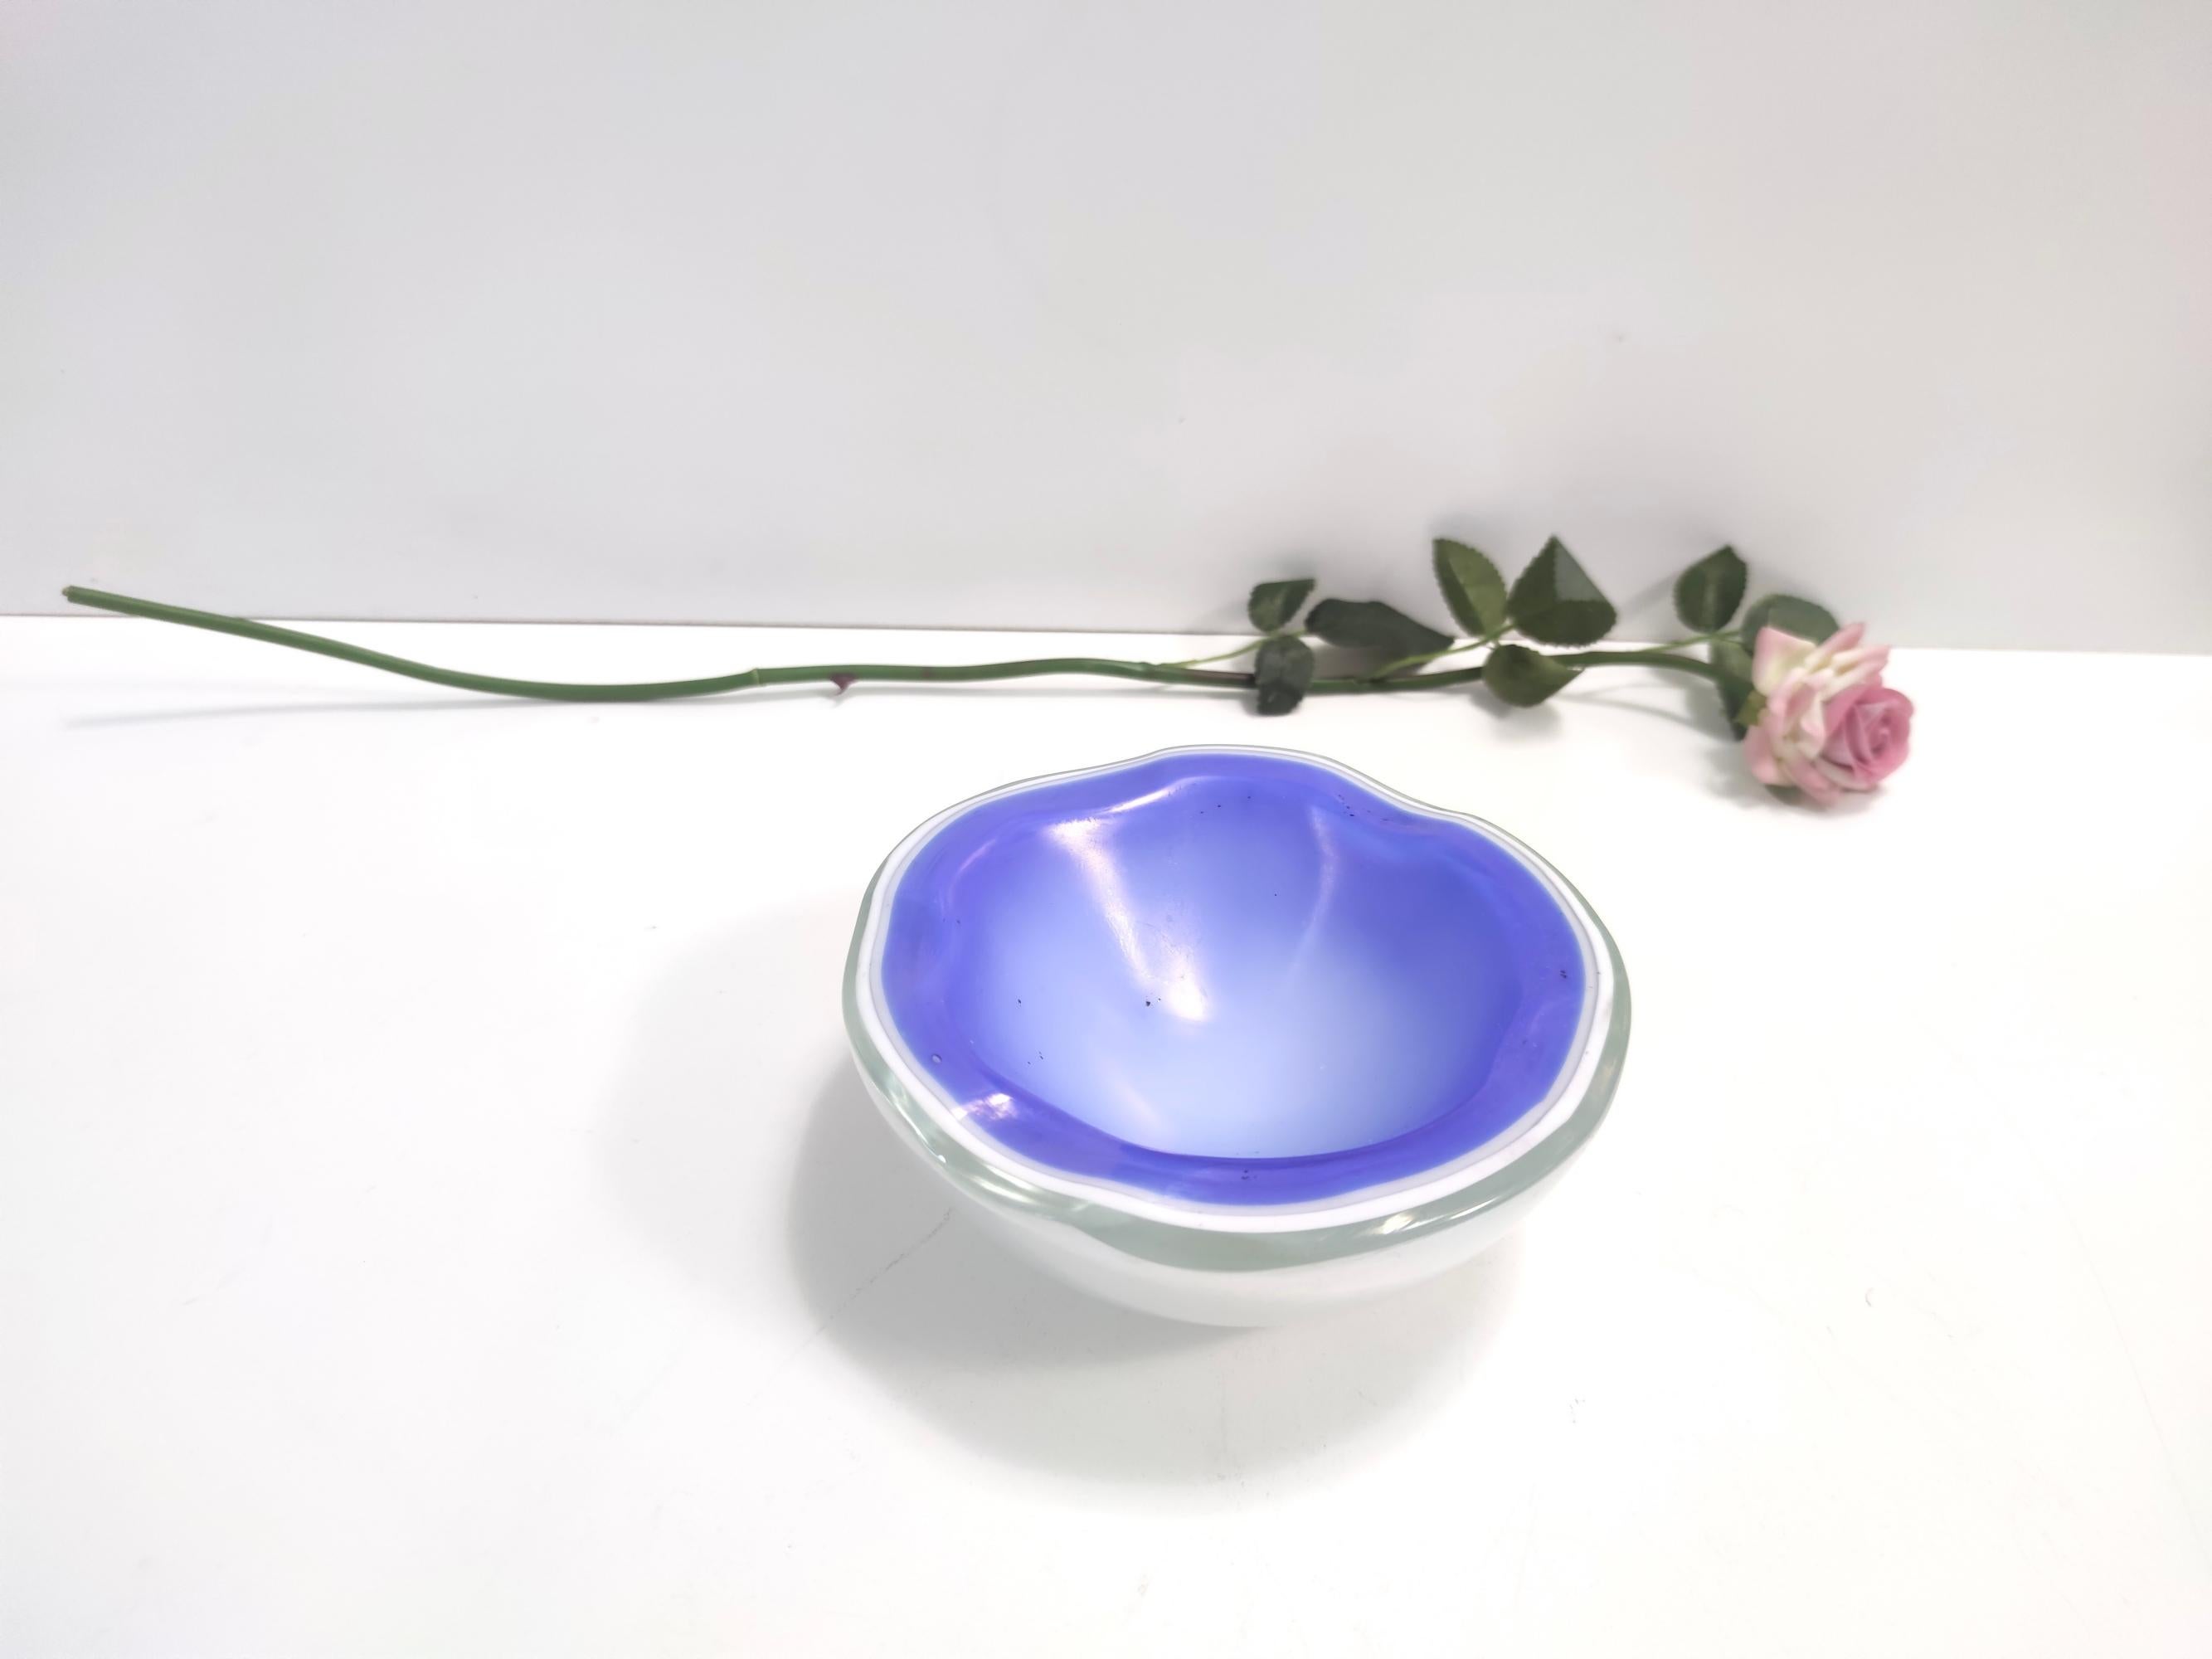 Made in Italy, Murano, 1950s- 1960s.
It is made in quite heavy 4-layered iridescent cornflower blue and white hand-blown glass. 
This trinket bowl / ashtray looks like a geode. 
It might show black impurities due to its old process: as a matter of